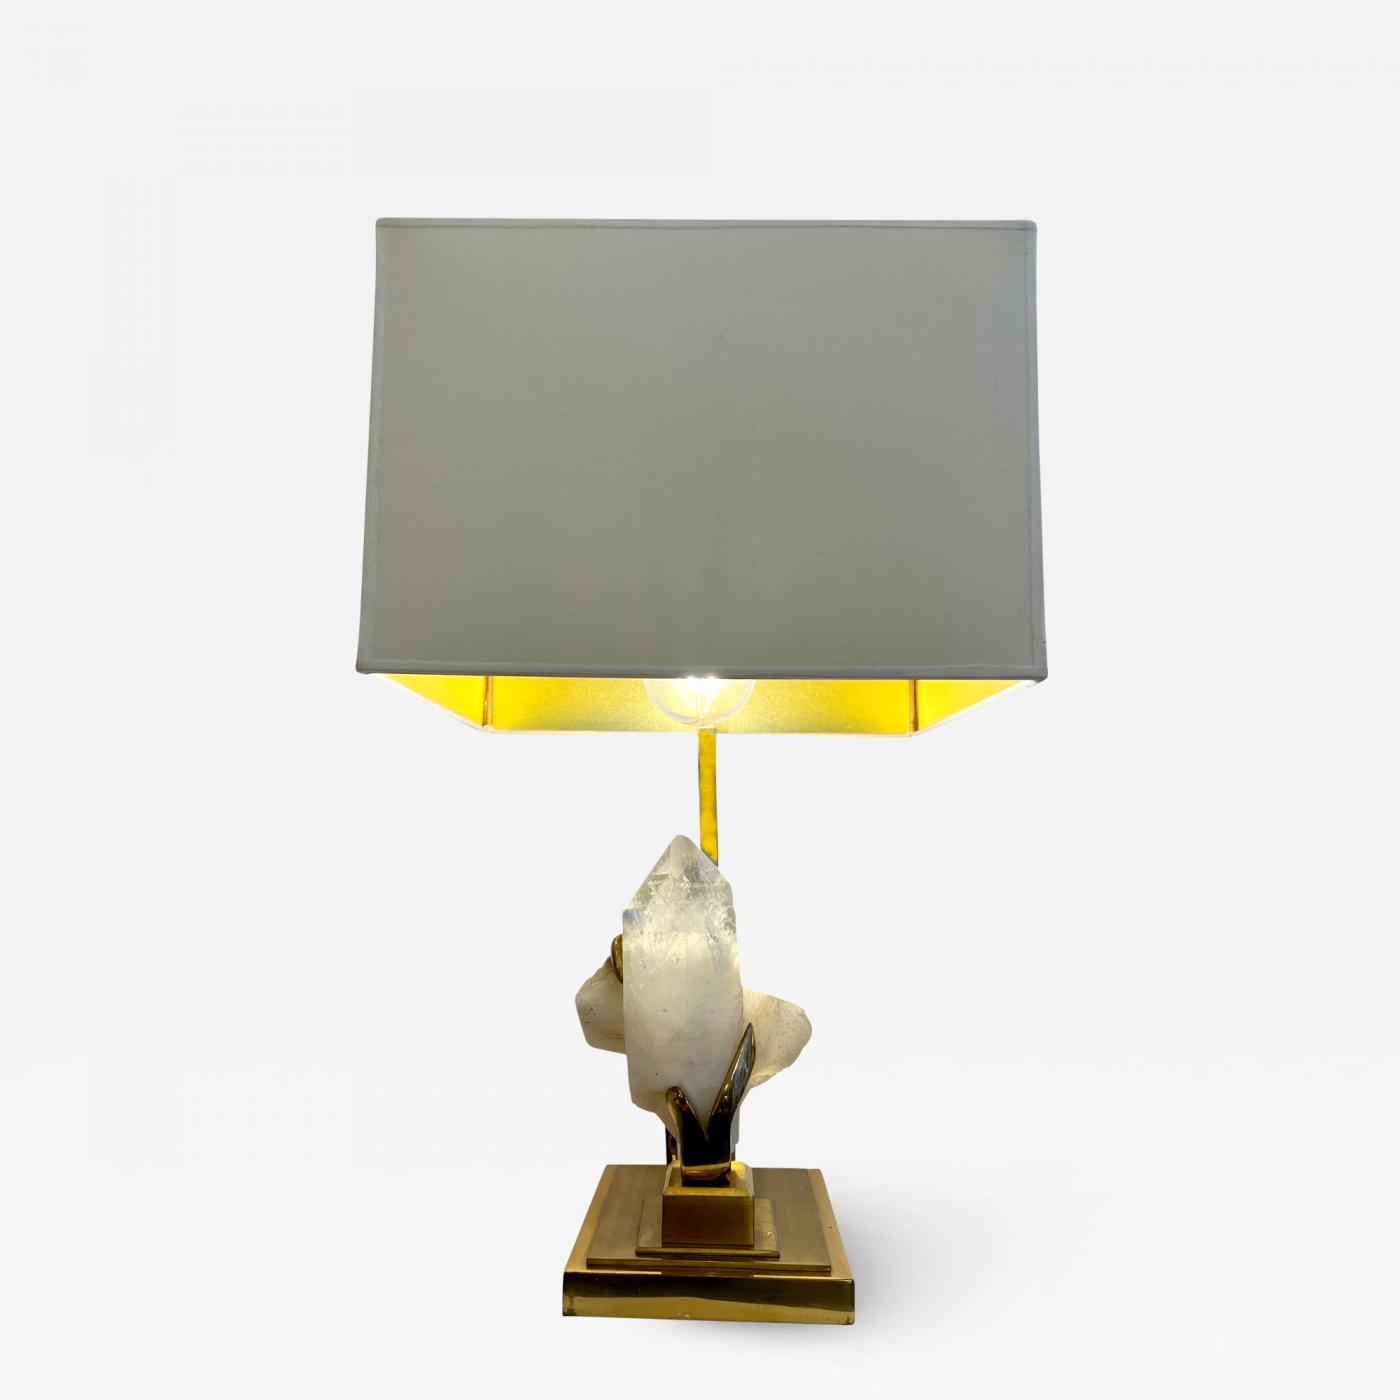 https://cdn.incollect.com/sites/default/files/zoom/Willy-Daro-Rock-crystal-and-brass-table-lamp-Willy-Daro-1970-619170-2948585.jpg